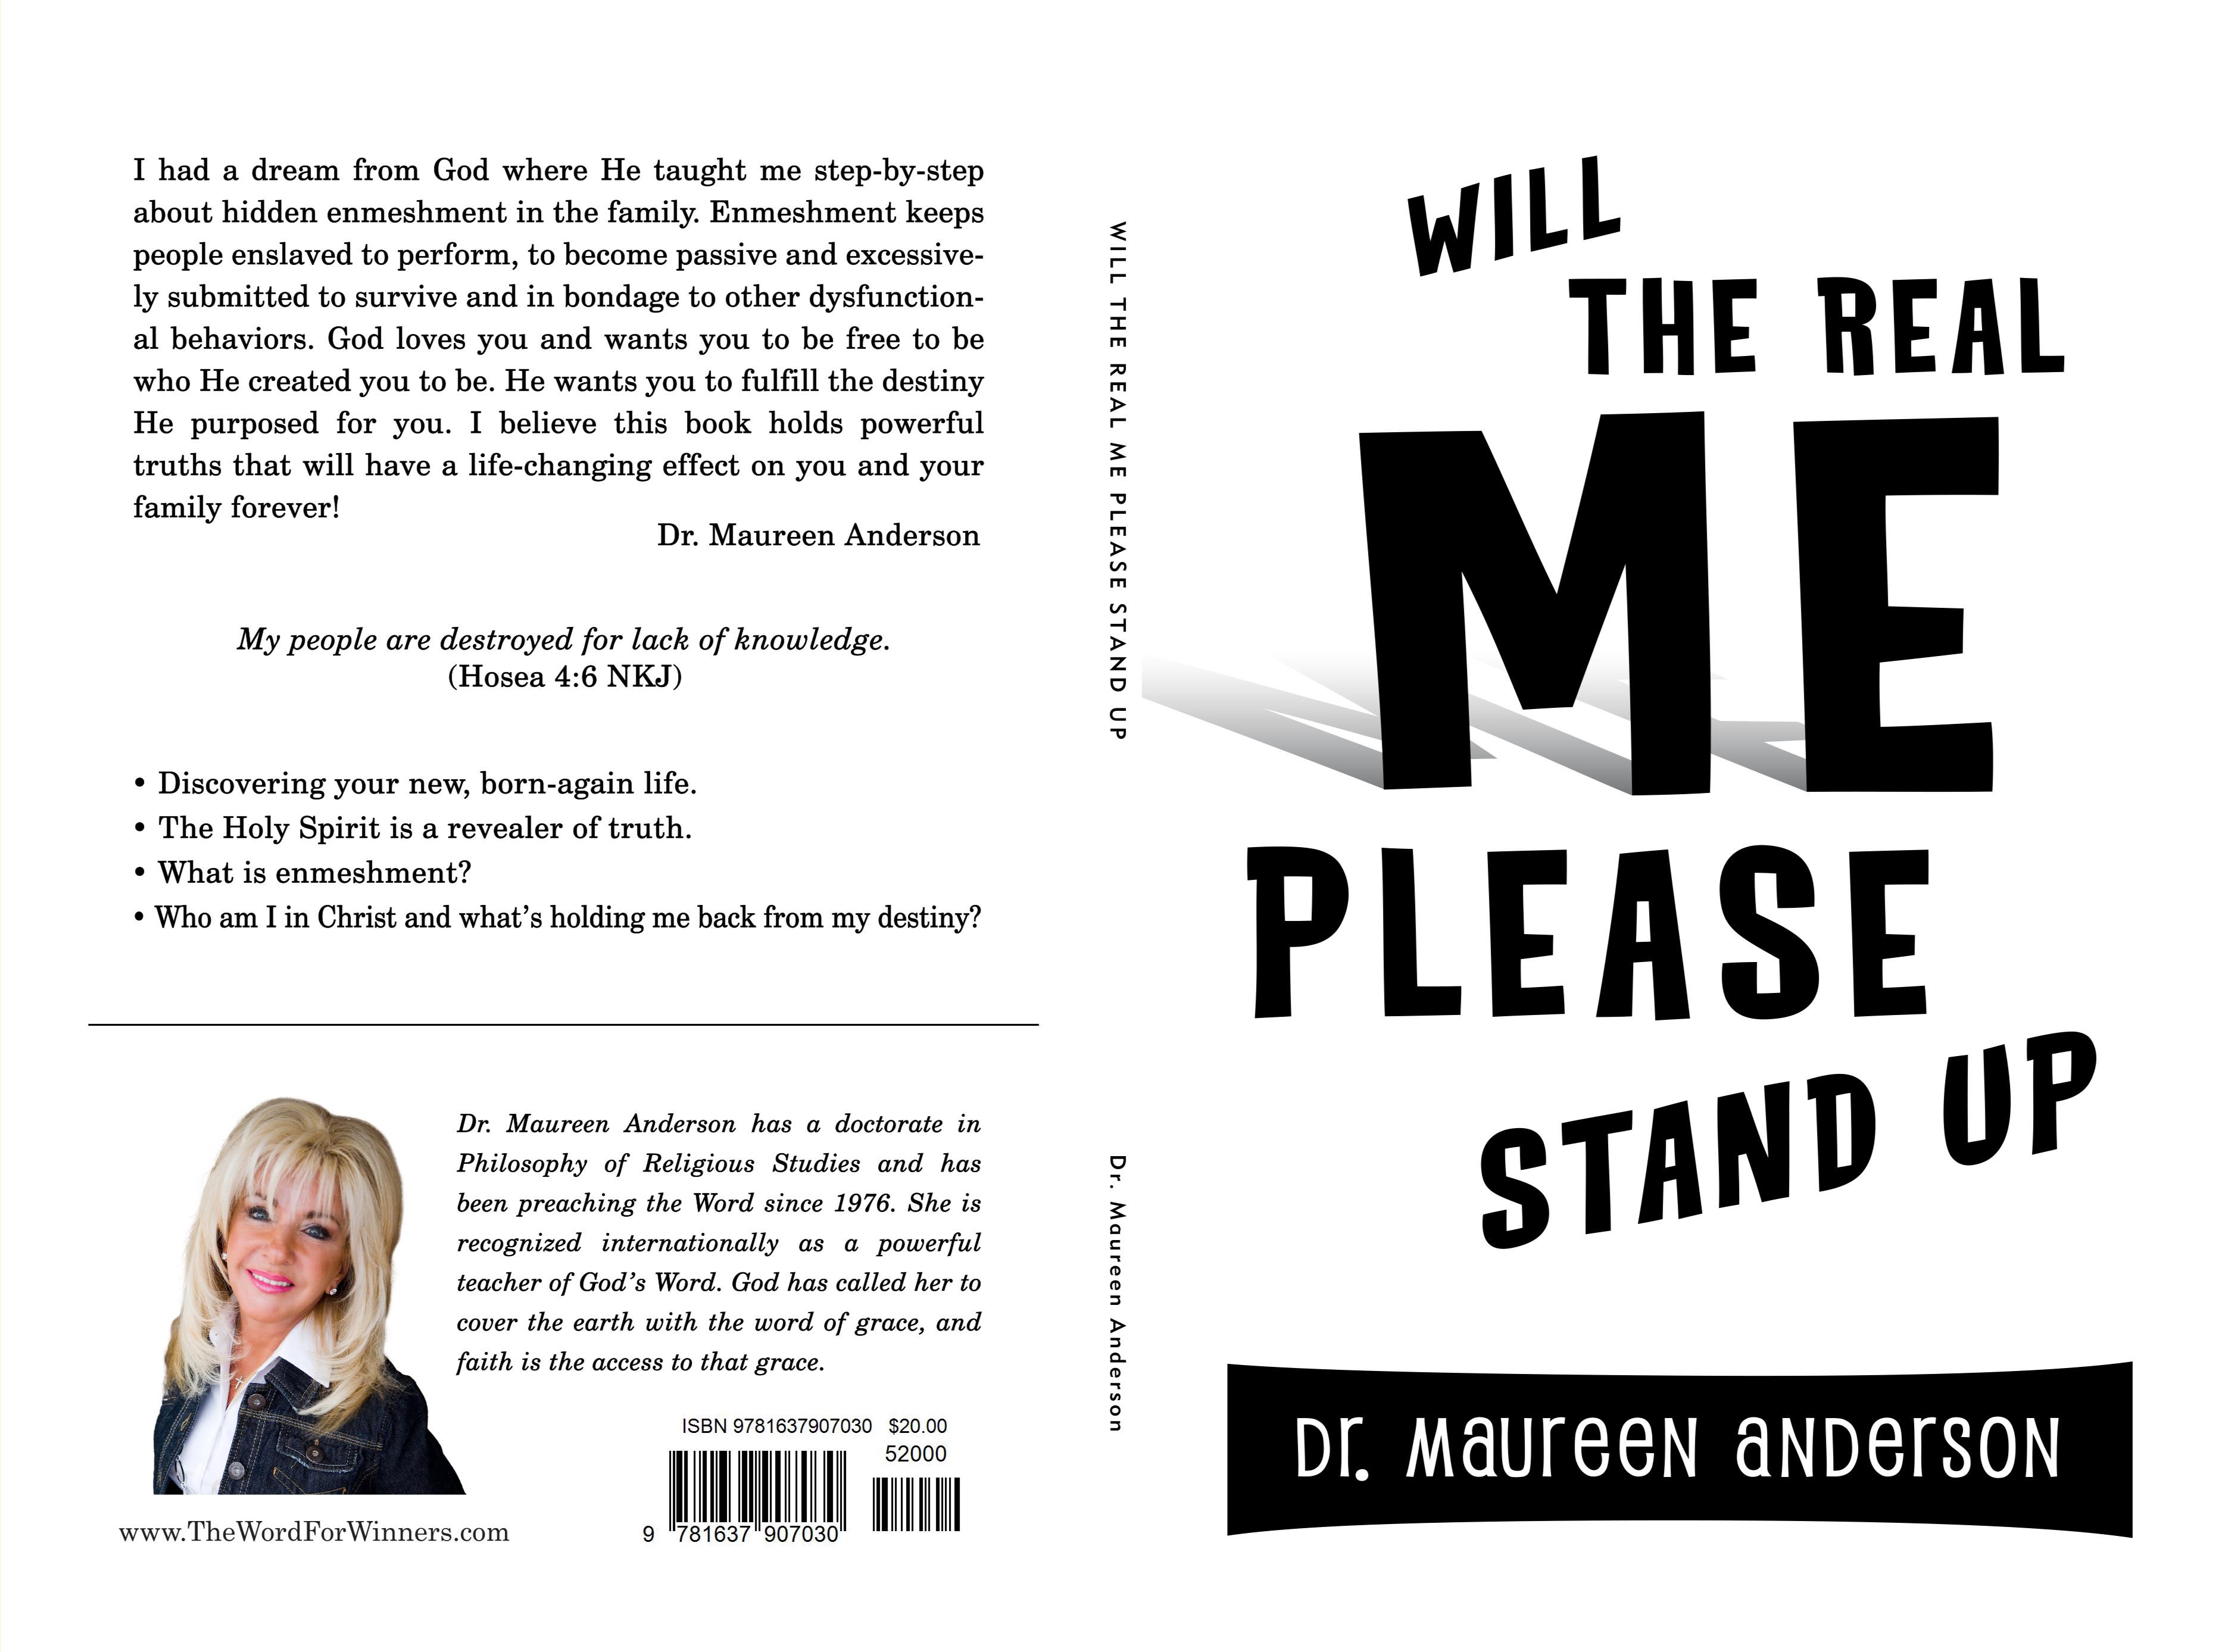 Will The Real Me Please Stand Up cover image